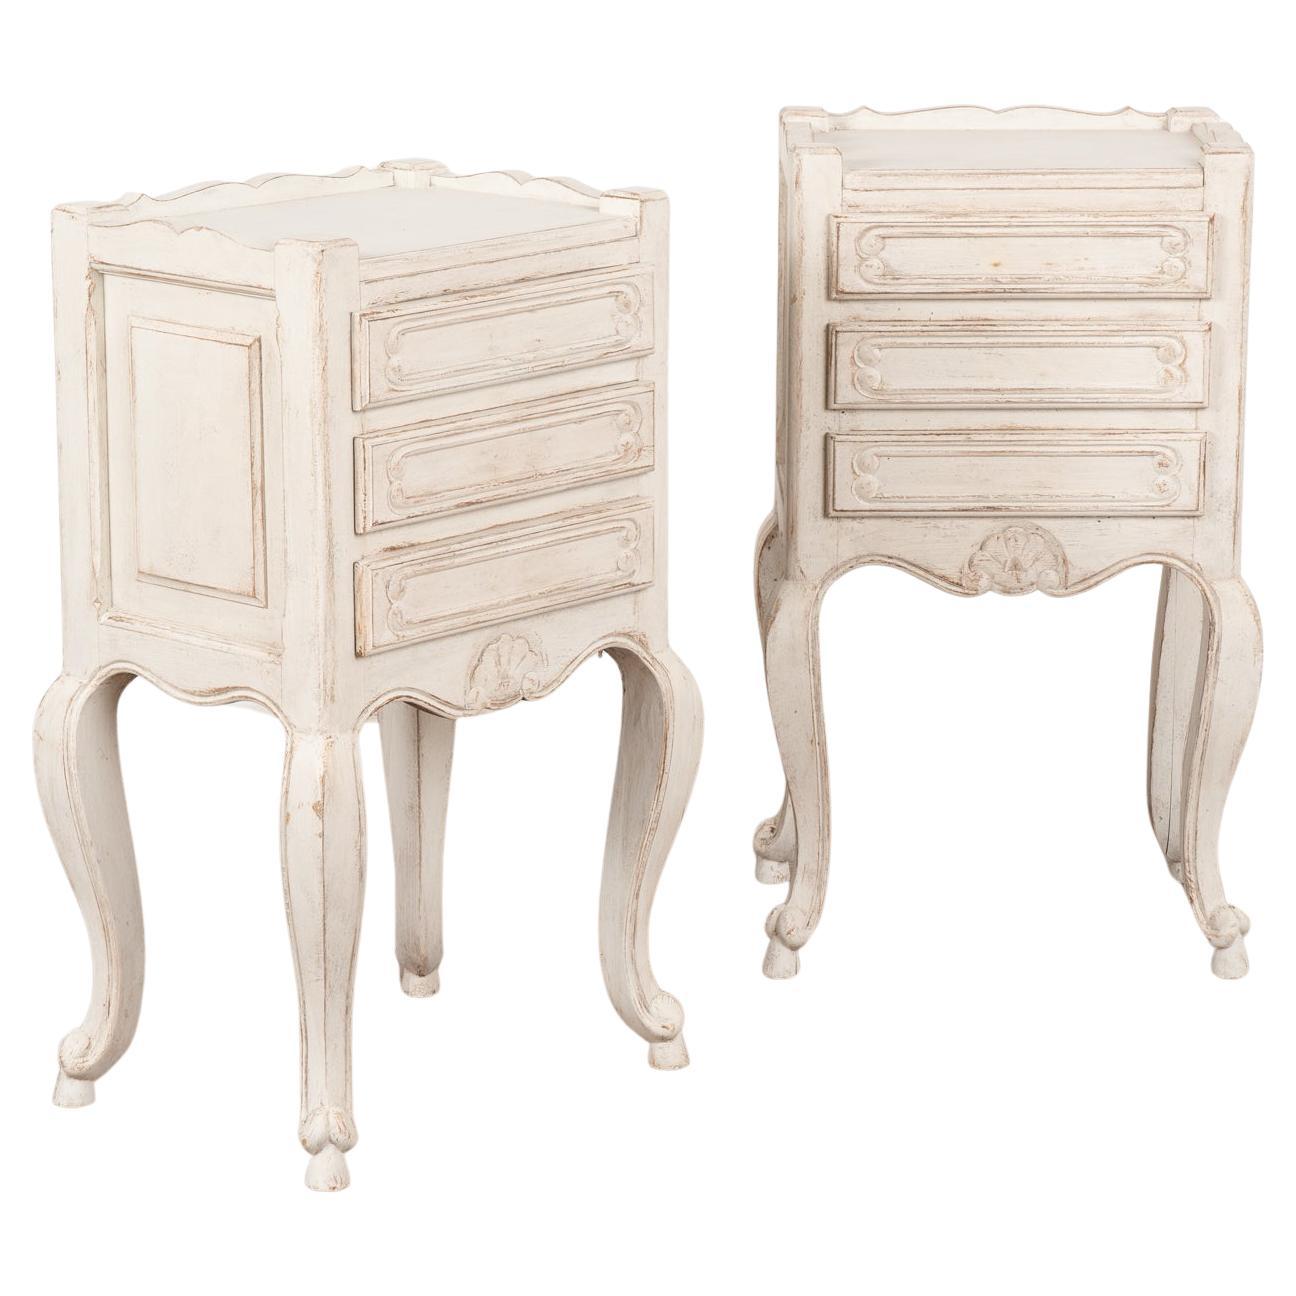 Pair, White Painted Small Chest of Drawers Nightstands, France Circa 1920